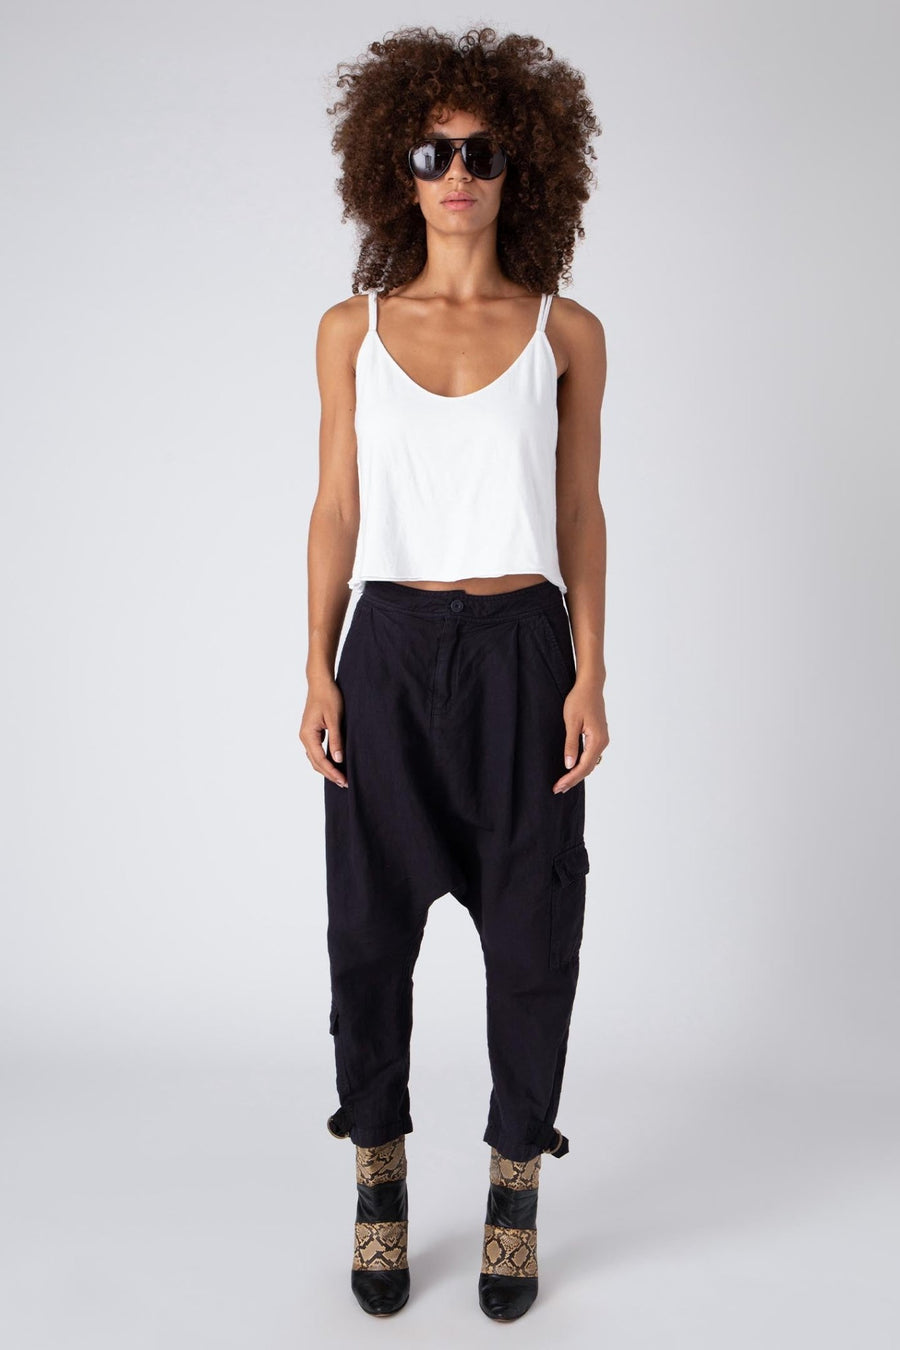 Yogi 8 - Cargo style low crotch pants available now online... | Facebook